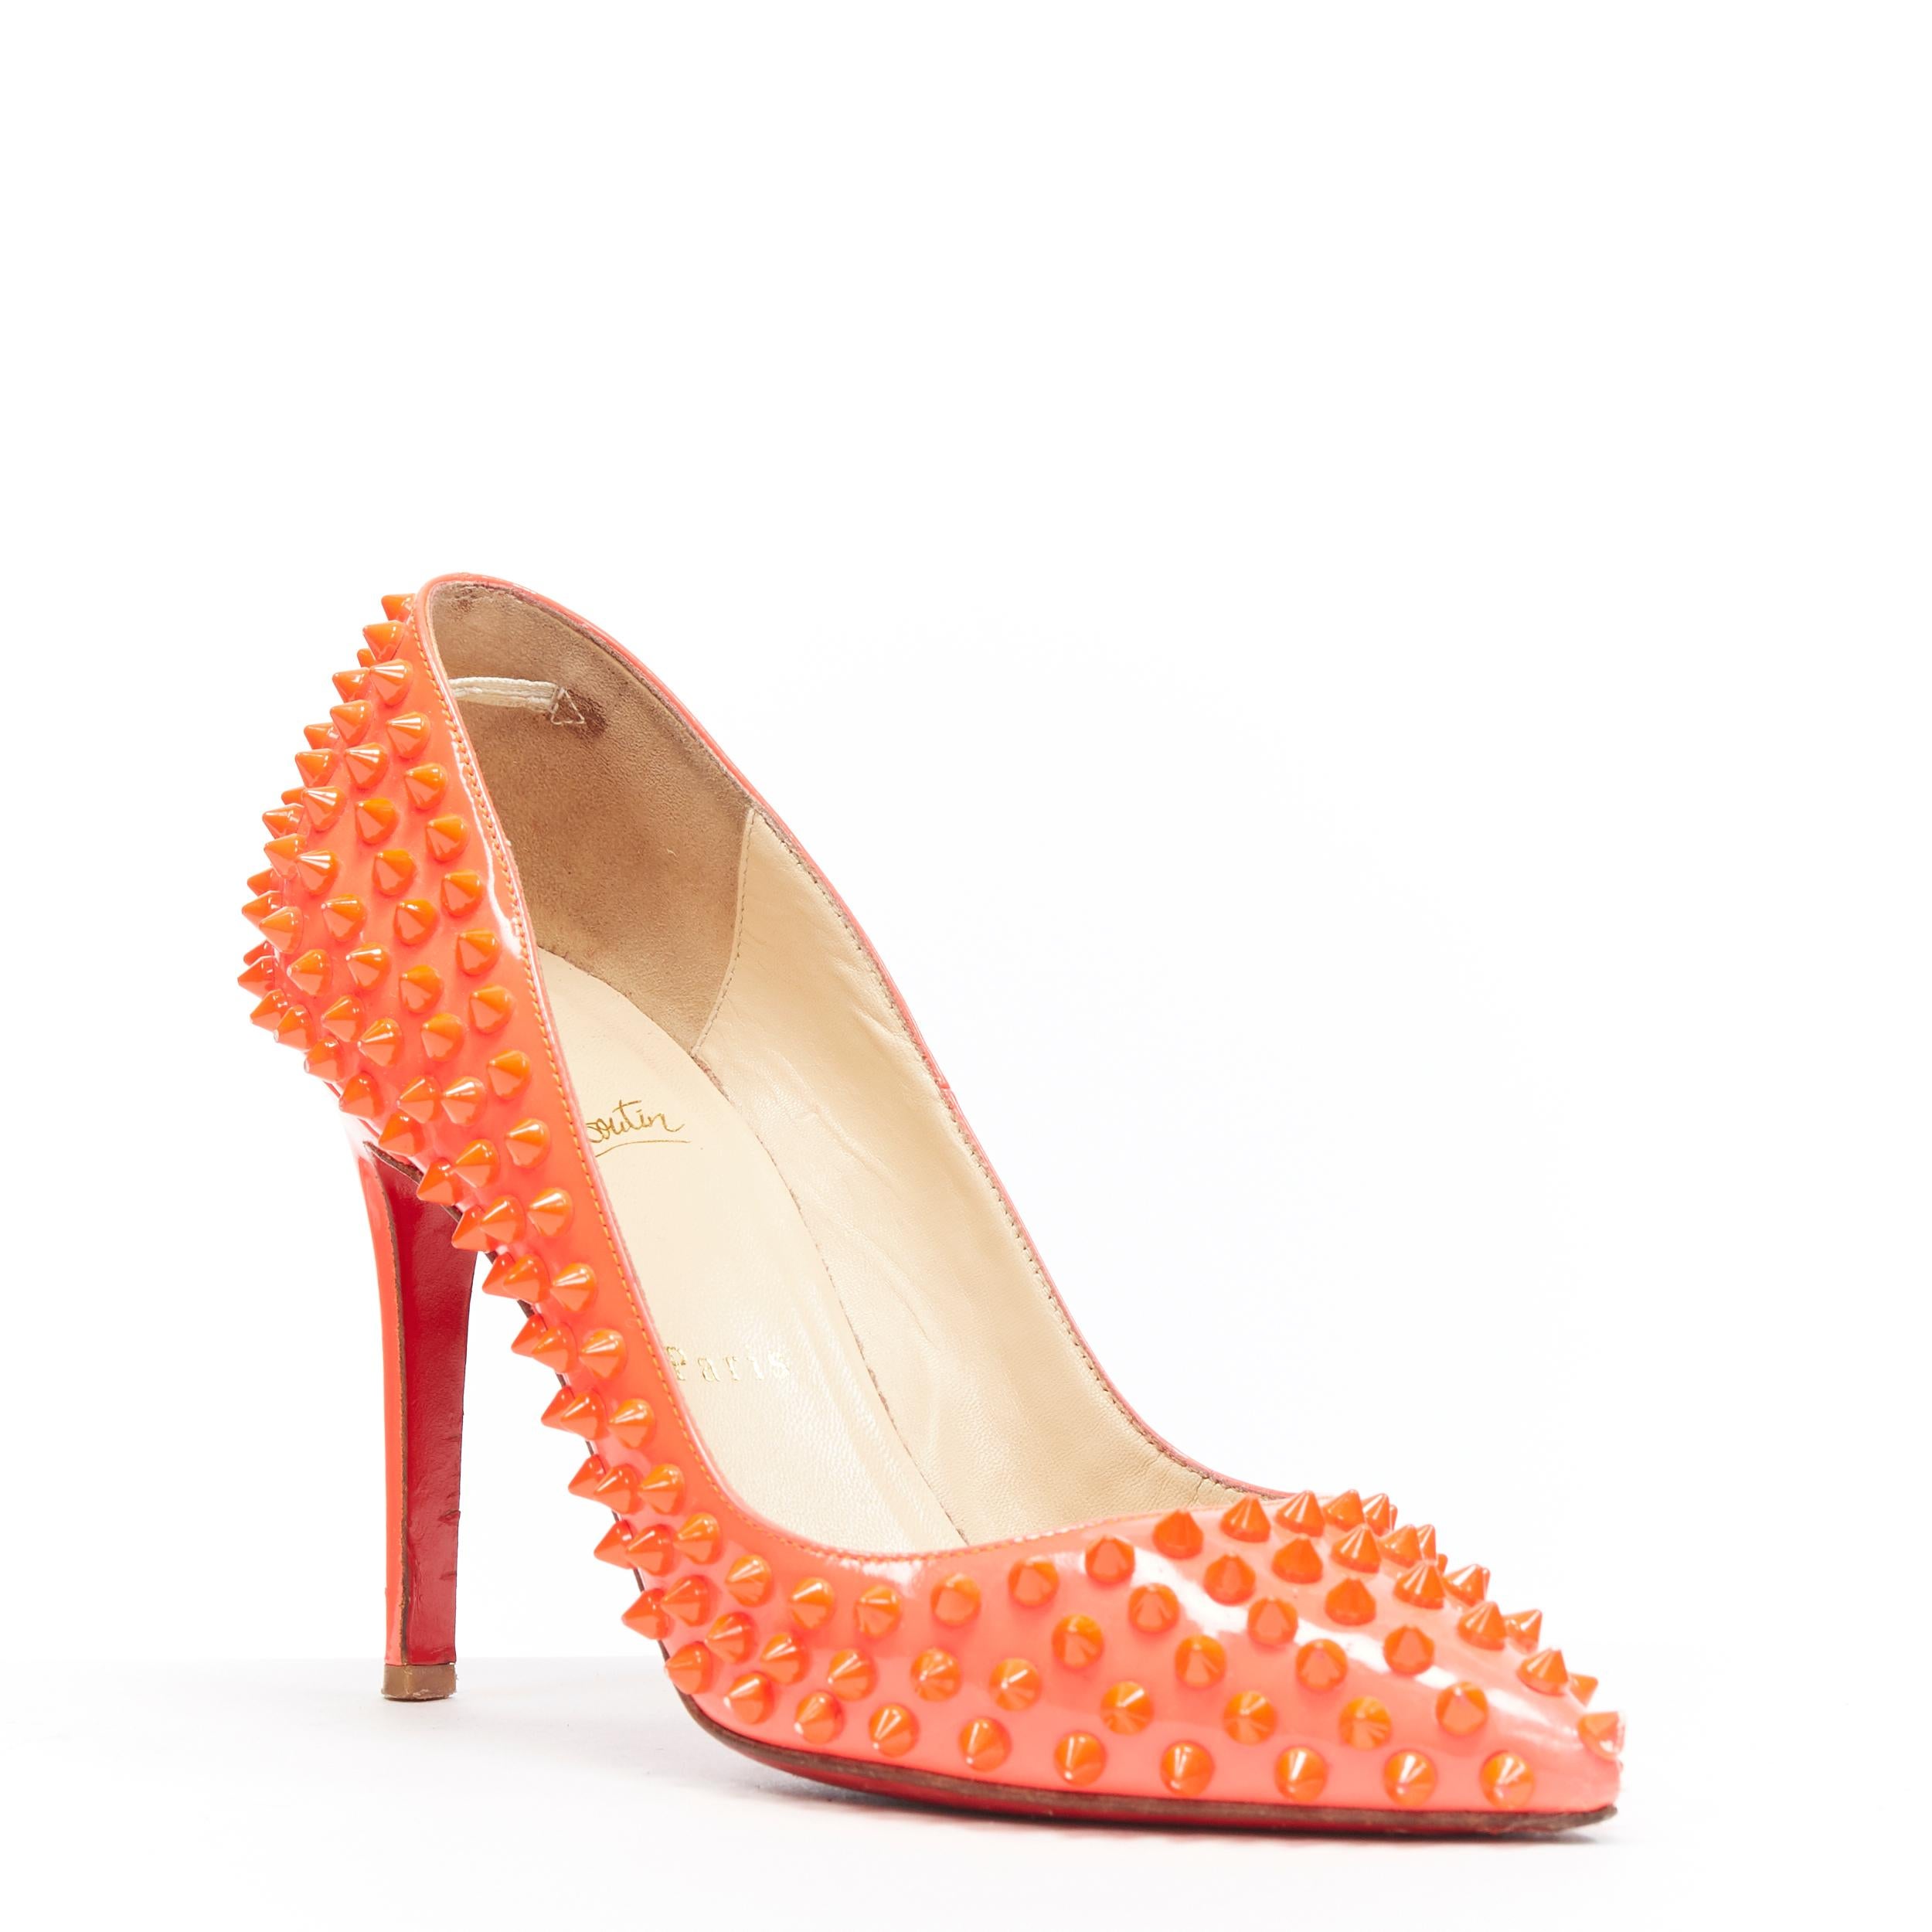 CHRISTIAN LOUBOUTIN neon pink patent spike stud point toe pigalle pump EU37.5 
Brand: Christian Louboutin
Designer: Christian Louboutin
Model Name / Style: Spike pump
Material: Patent leather
Color: Pink
Pattern: Solid
Lining material: Leather
Extra